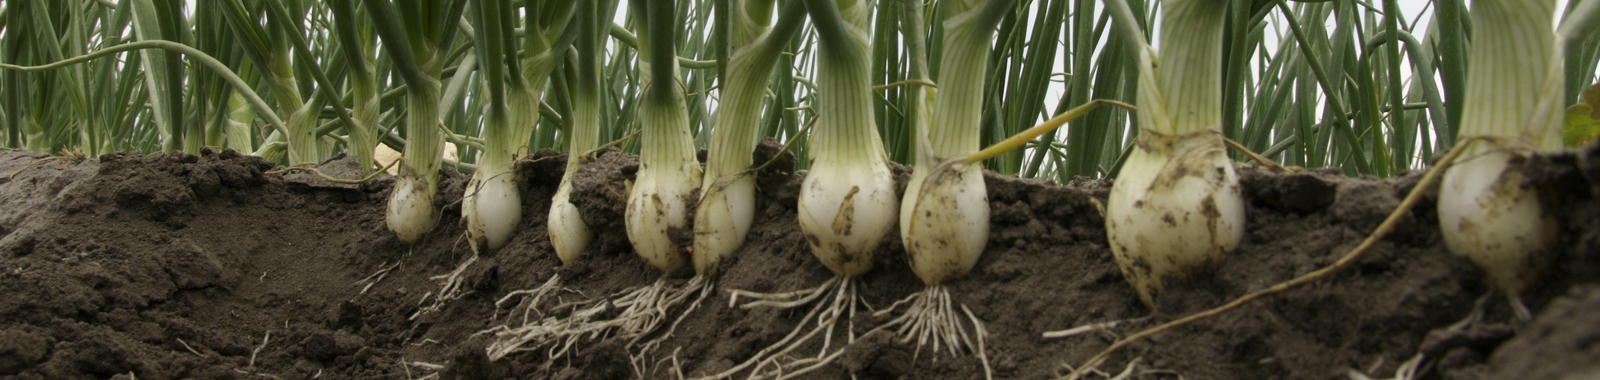 How to increase onion and garlic yield